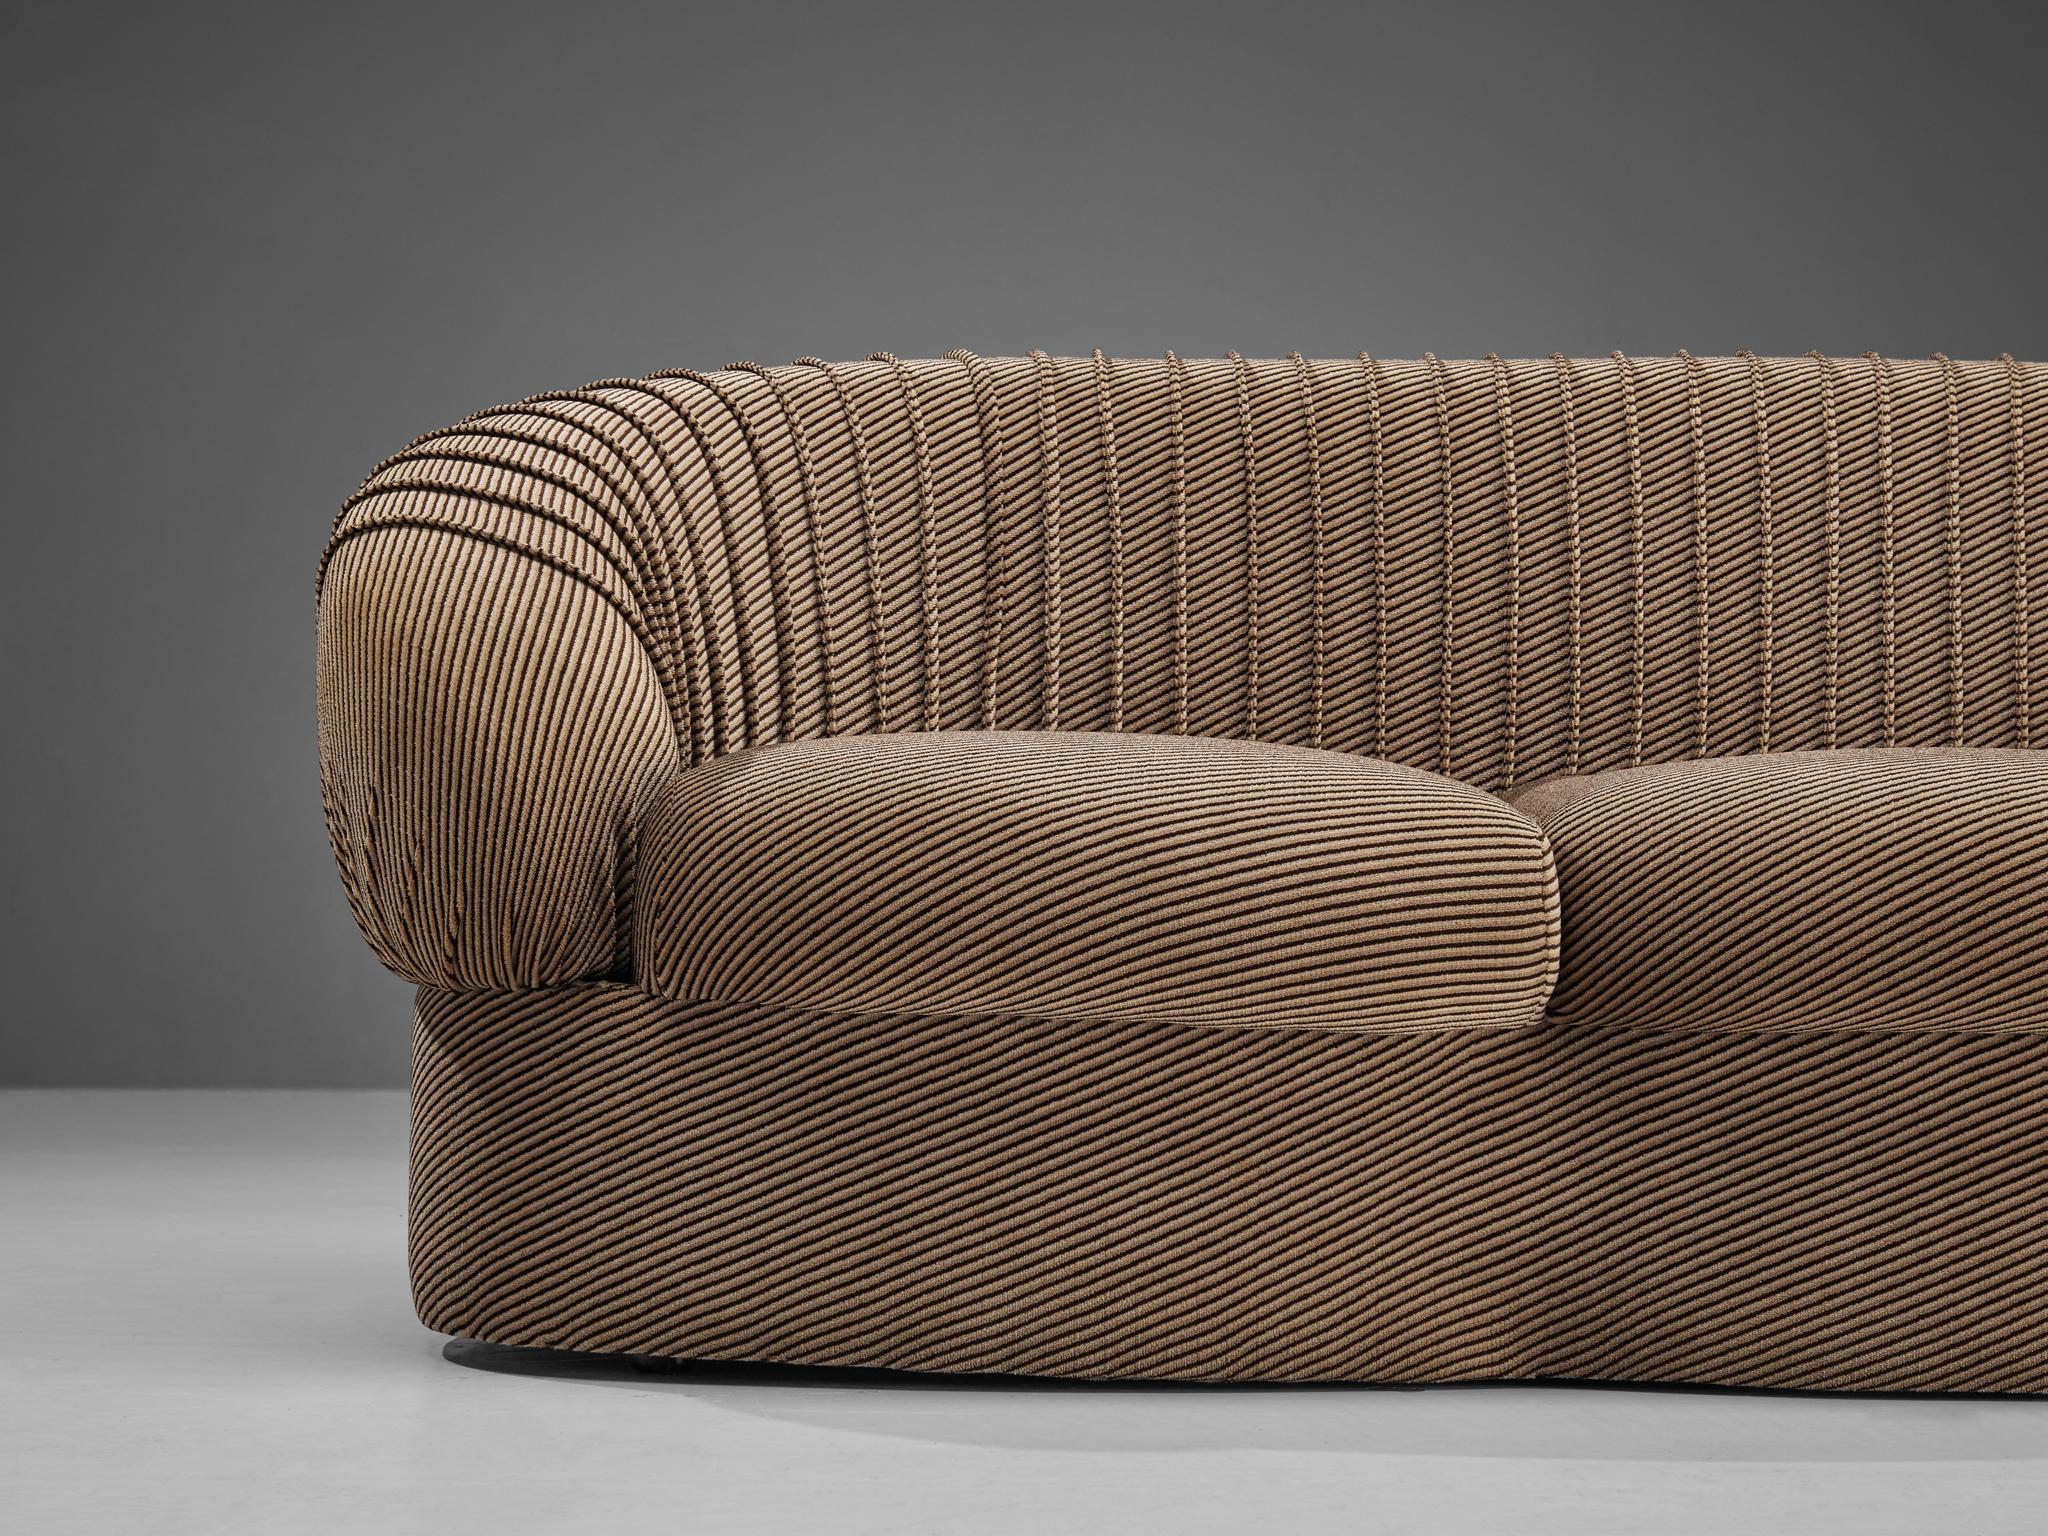 Characteristic Italian Sofa in Striped Sand Upholstery 1